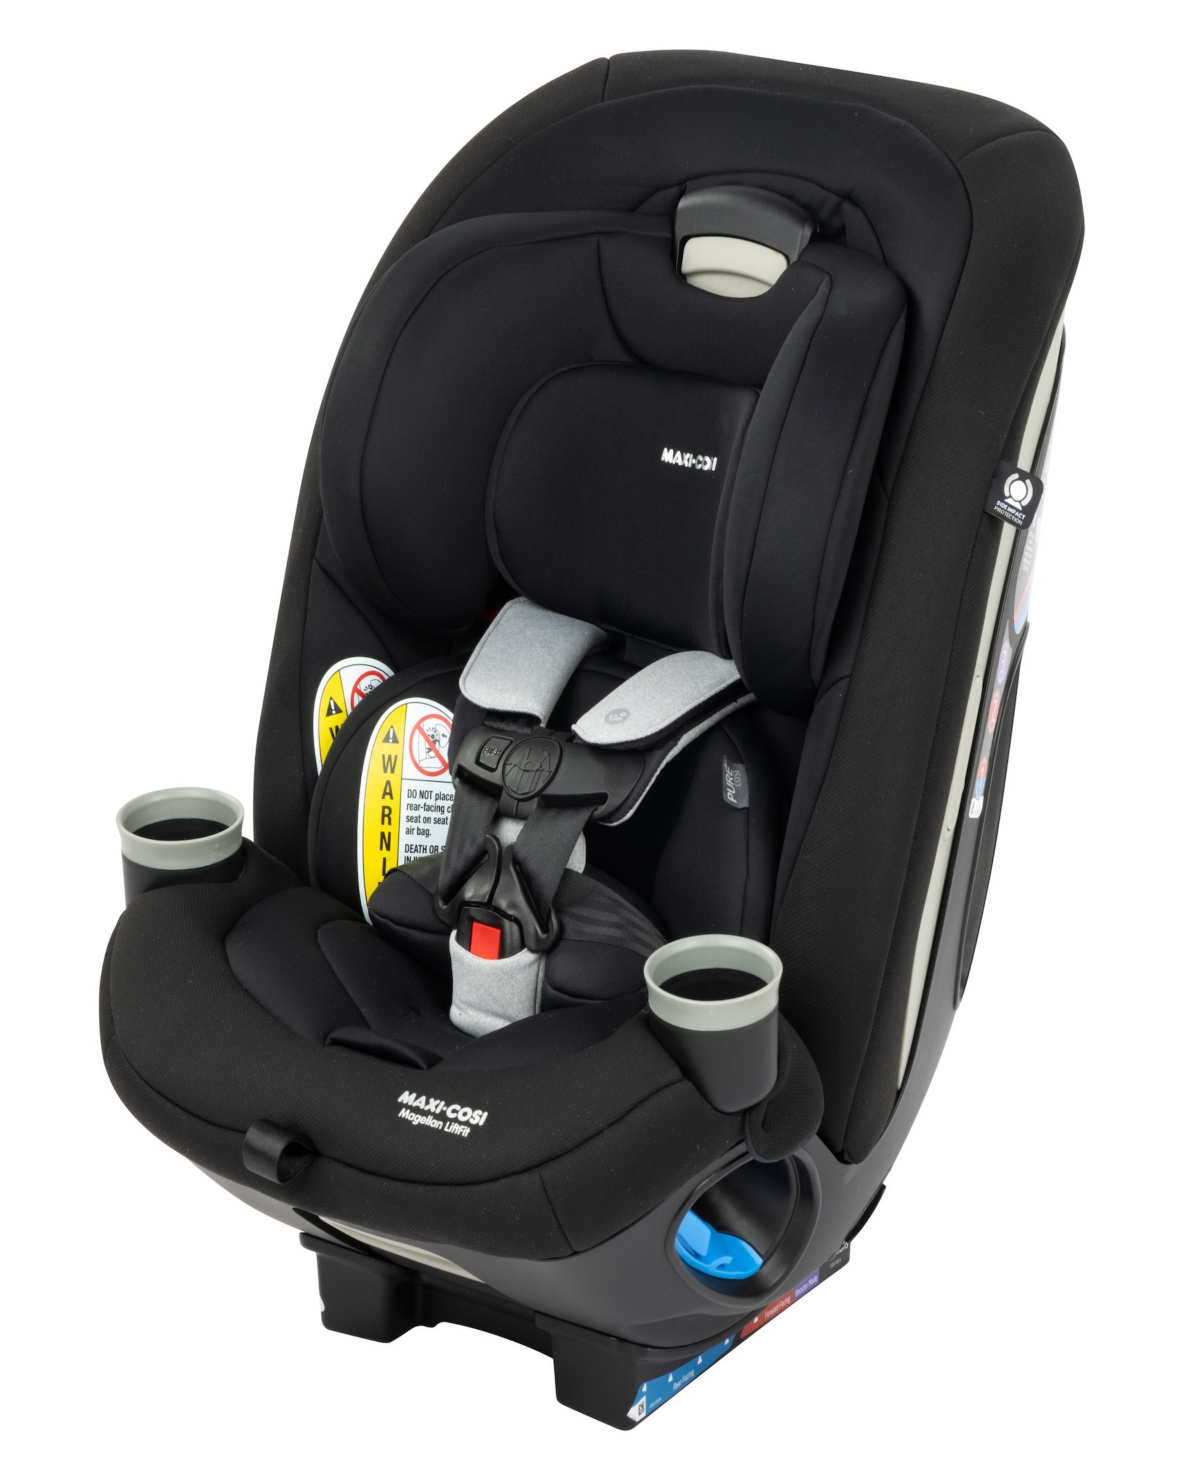 Maxi-Cosi® Magellan® LiftFit All-in-One Convertible Car Seat in Essential Black at Nordstrom